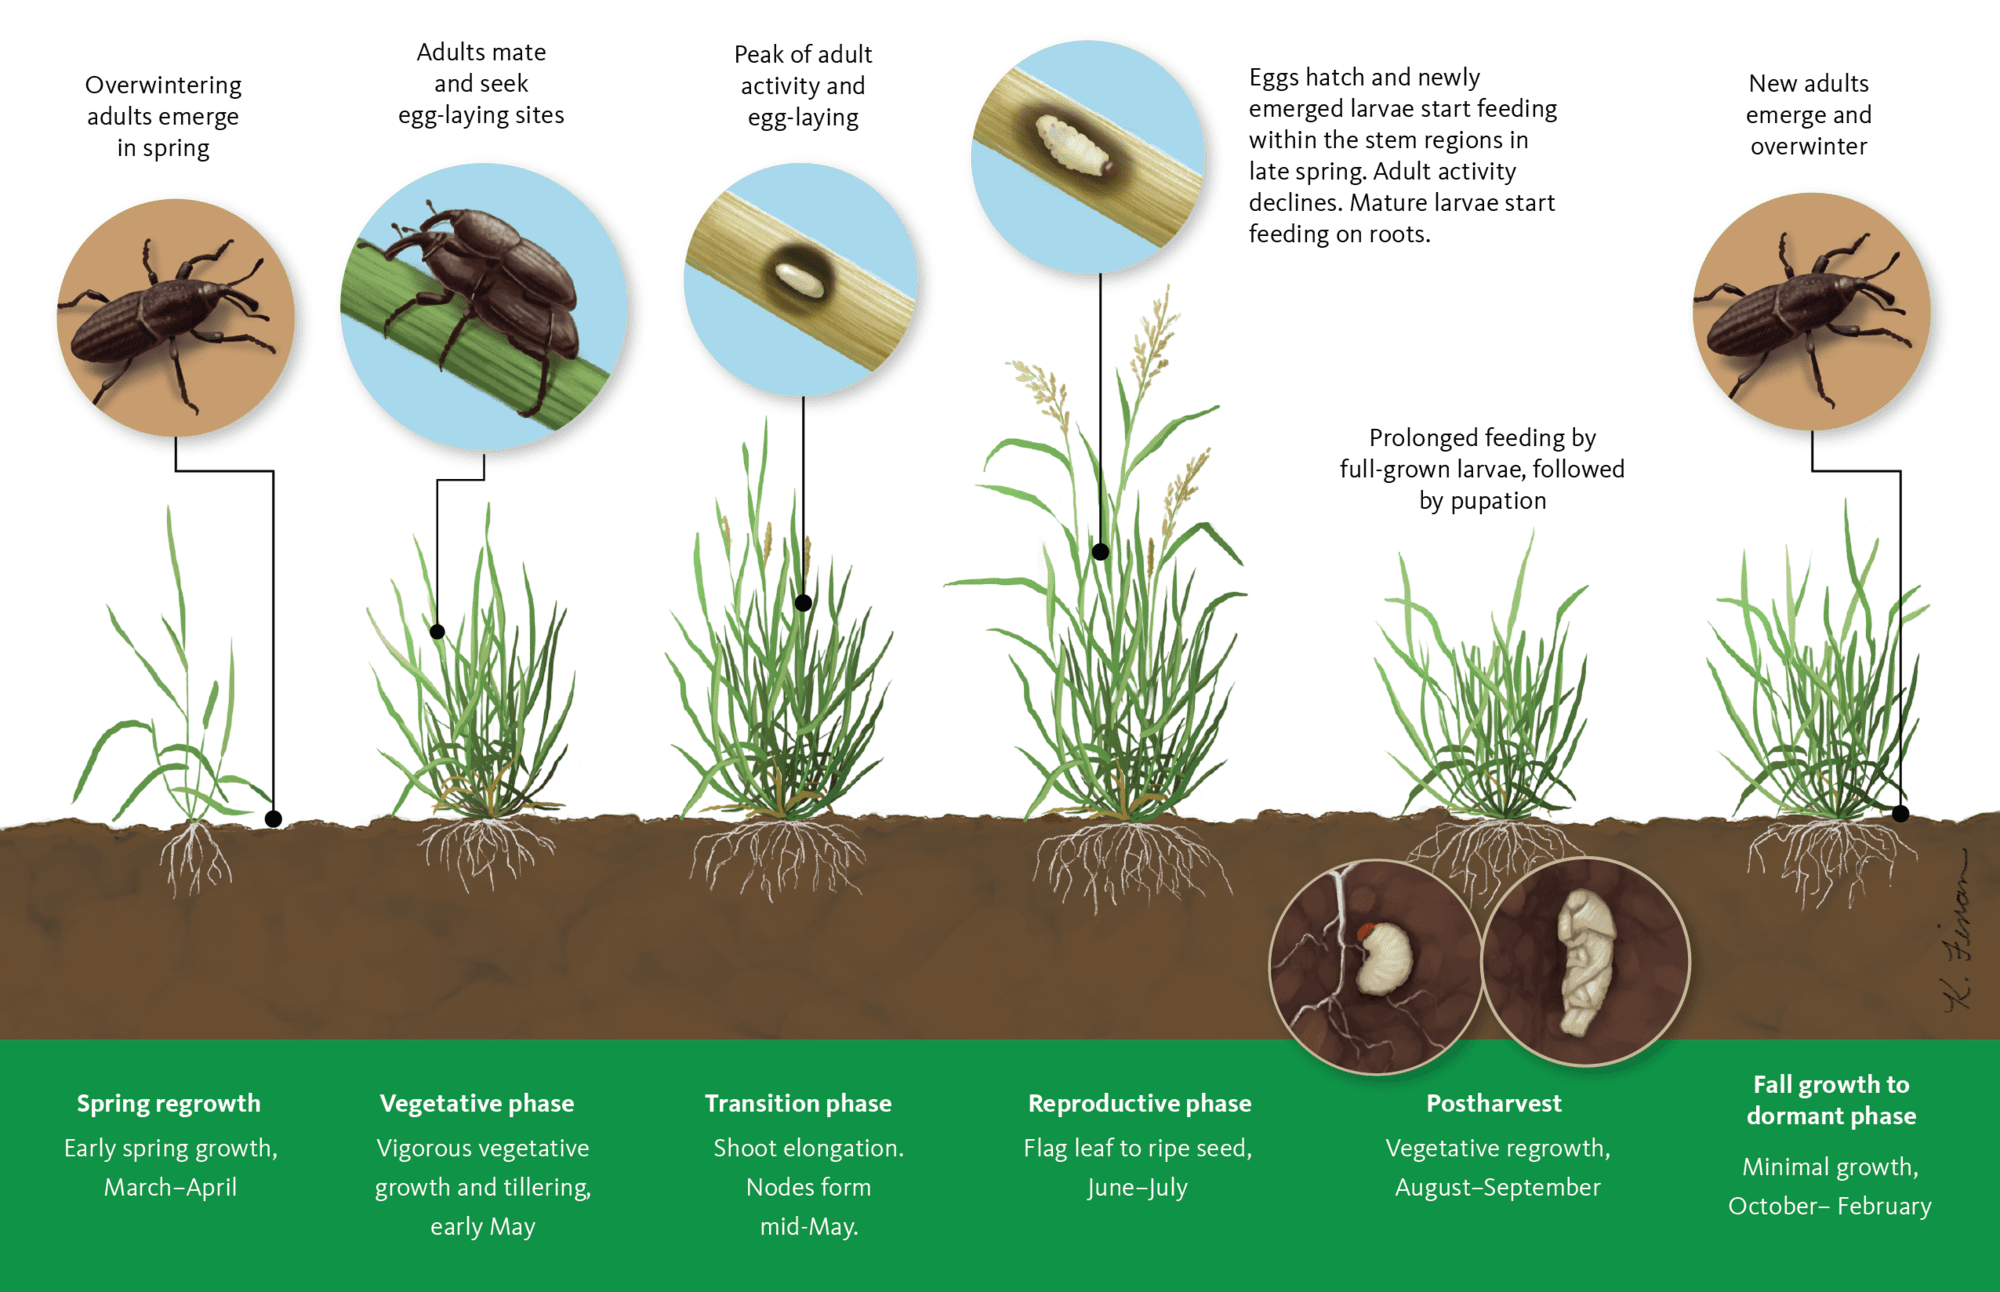 Illustration showing phases of billbug growth from egg to adults along with life cycle of grass